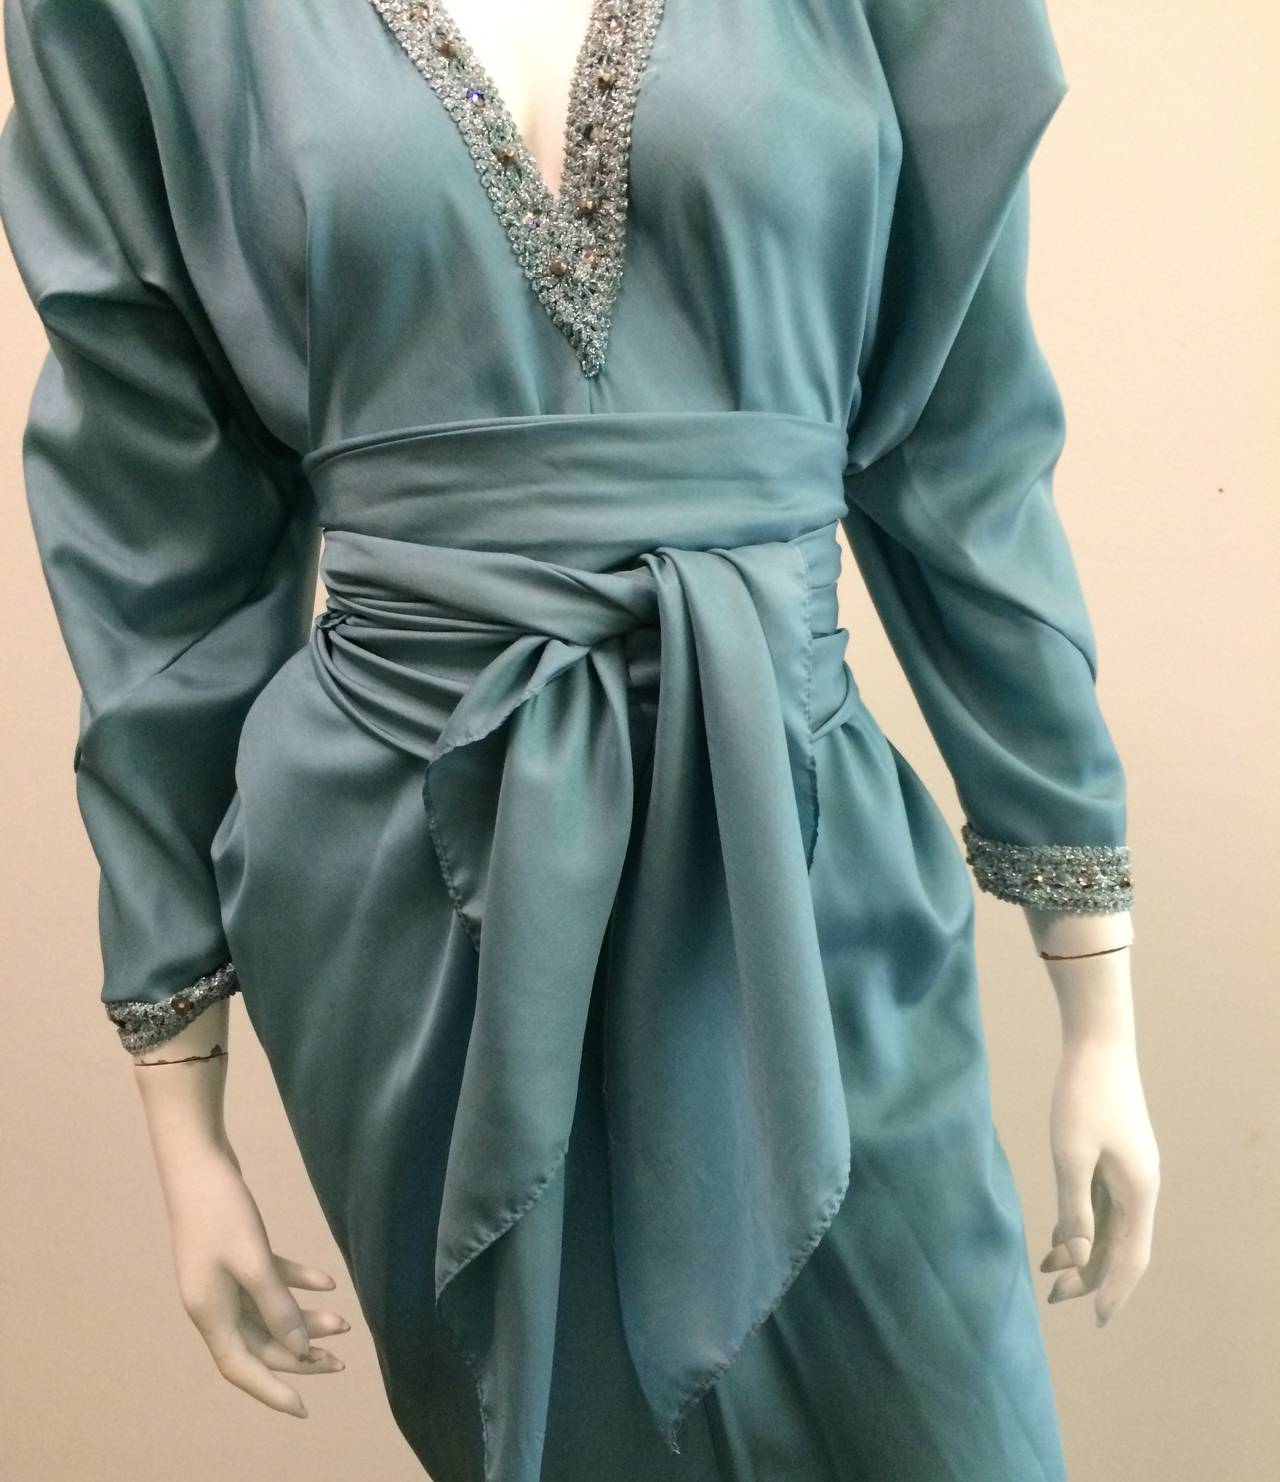 Halston 70s caftan / gown with beading trim and sash. 1